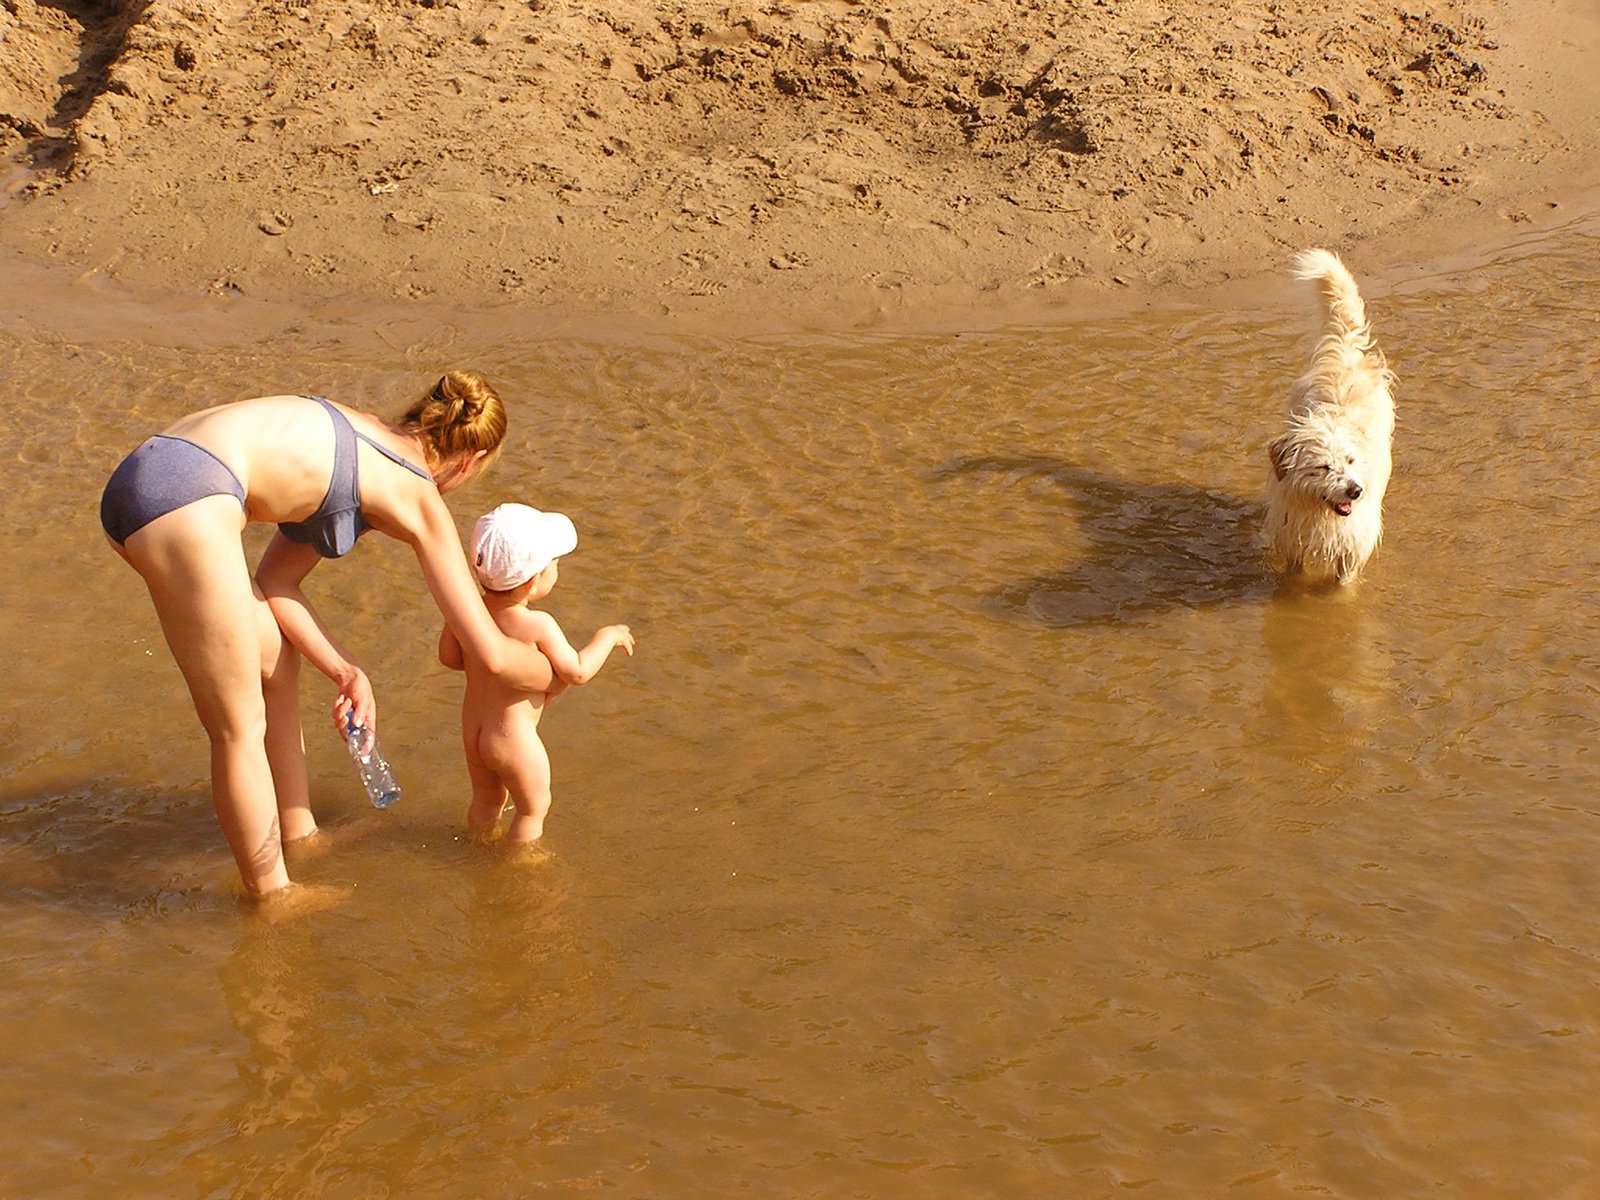 two people with a dog are wading in some shallow water